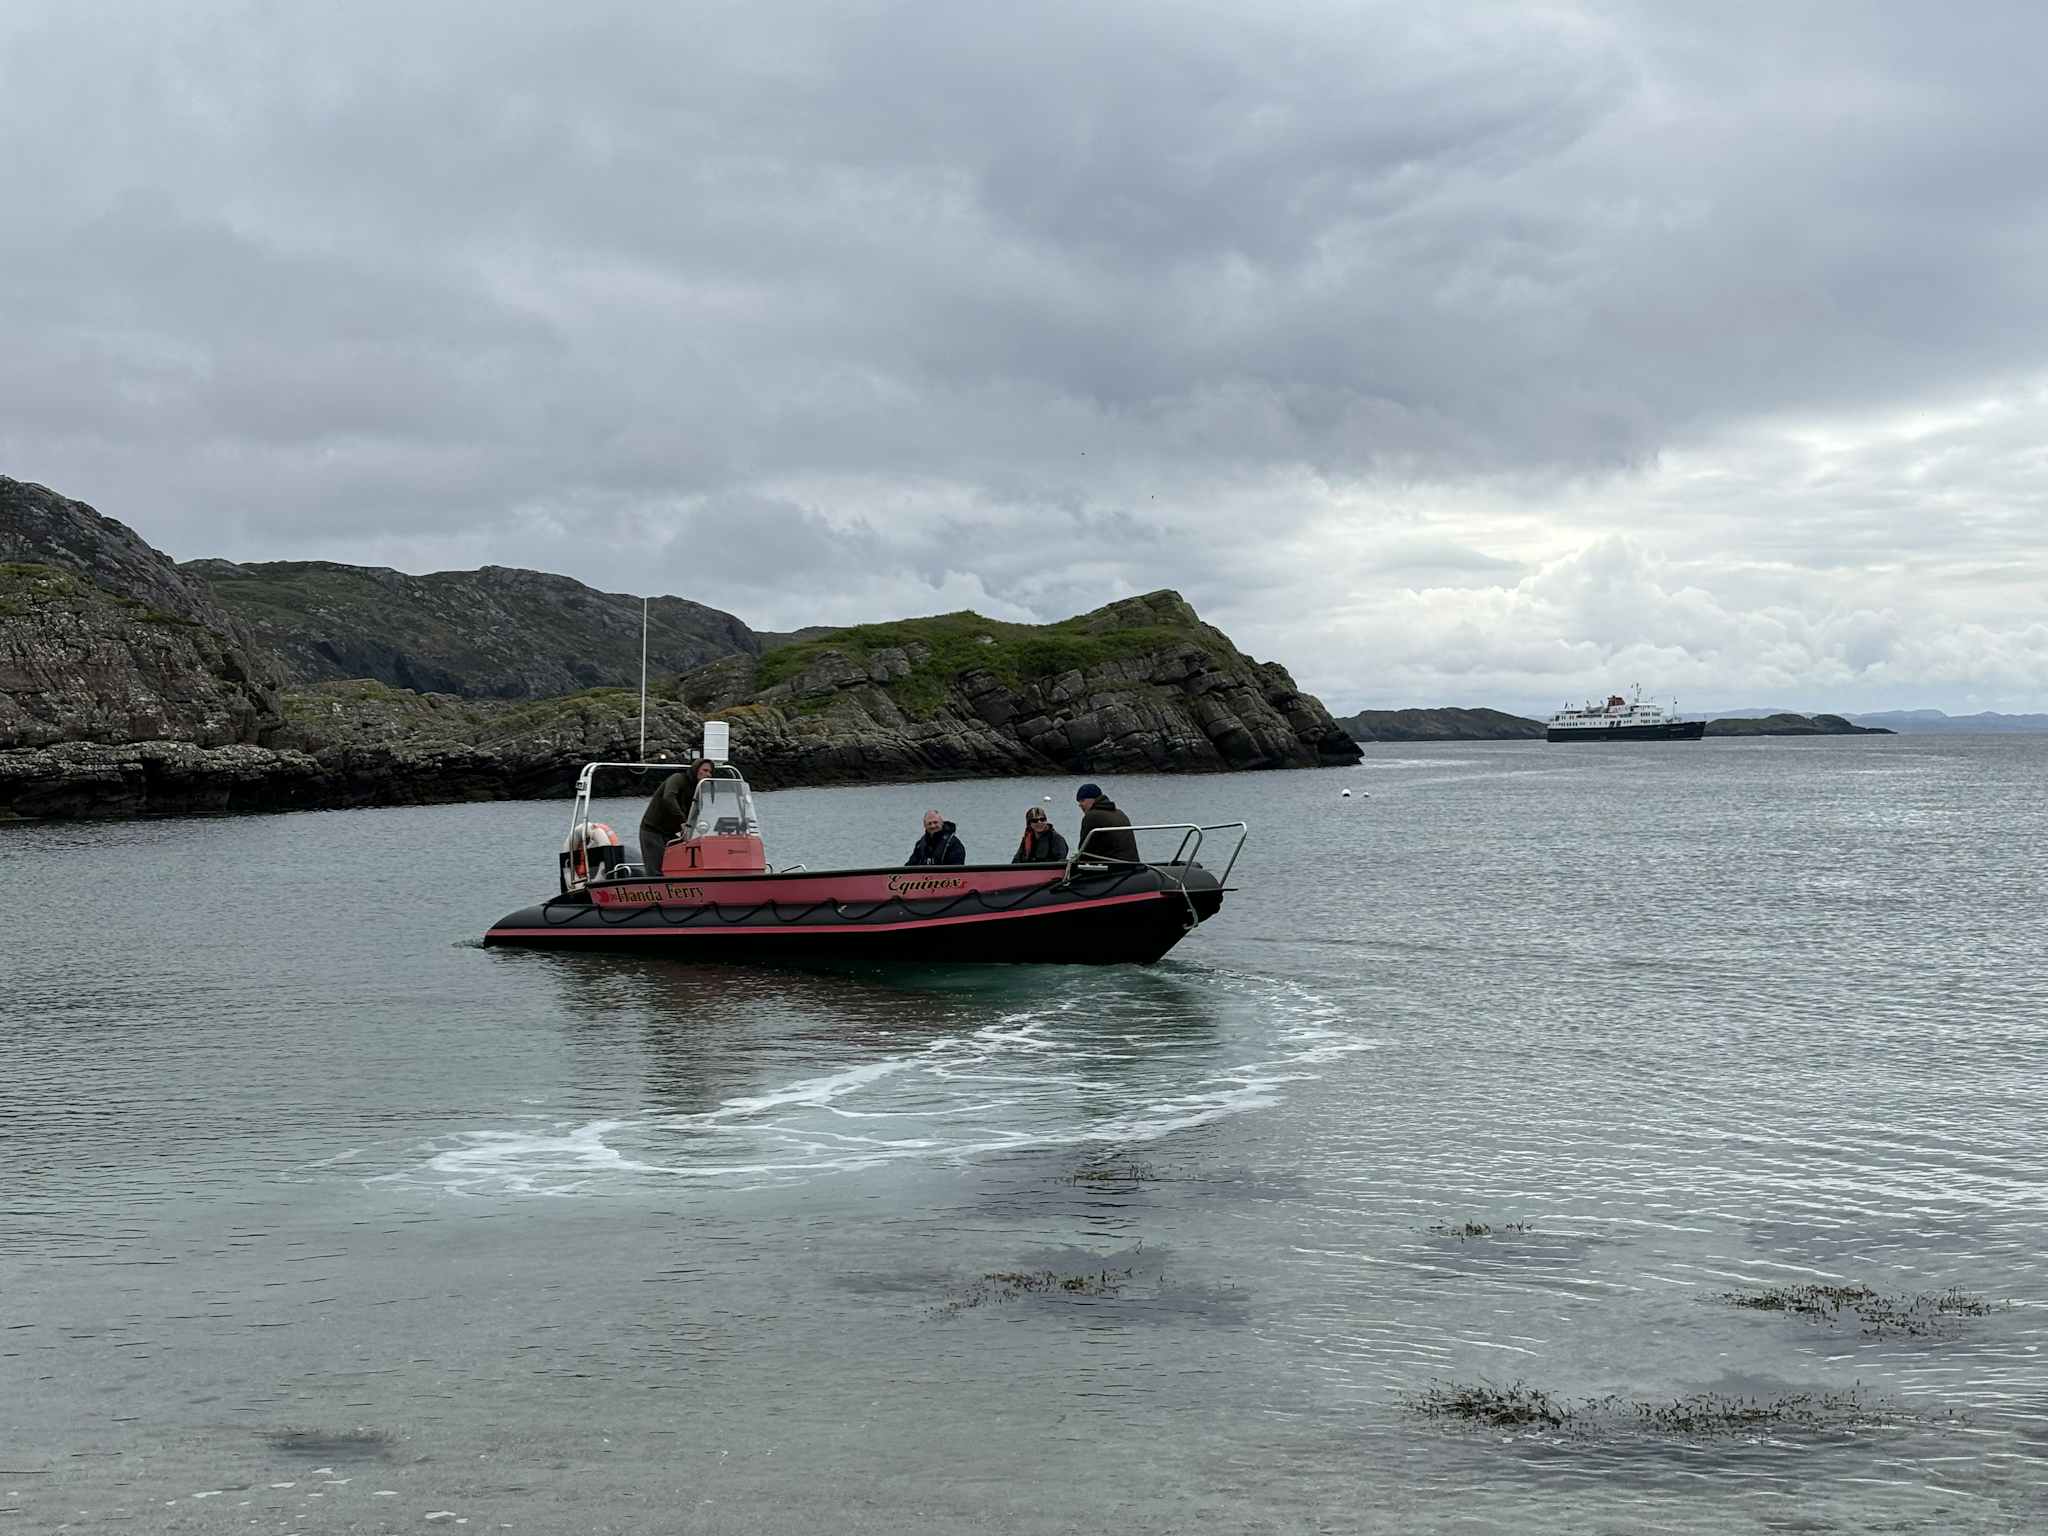 The boat used to transport guests to Handa from Hebridean Princess